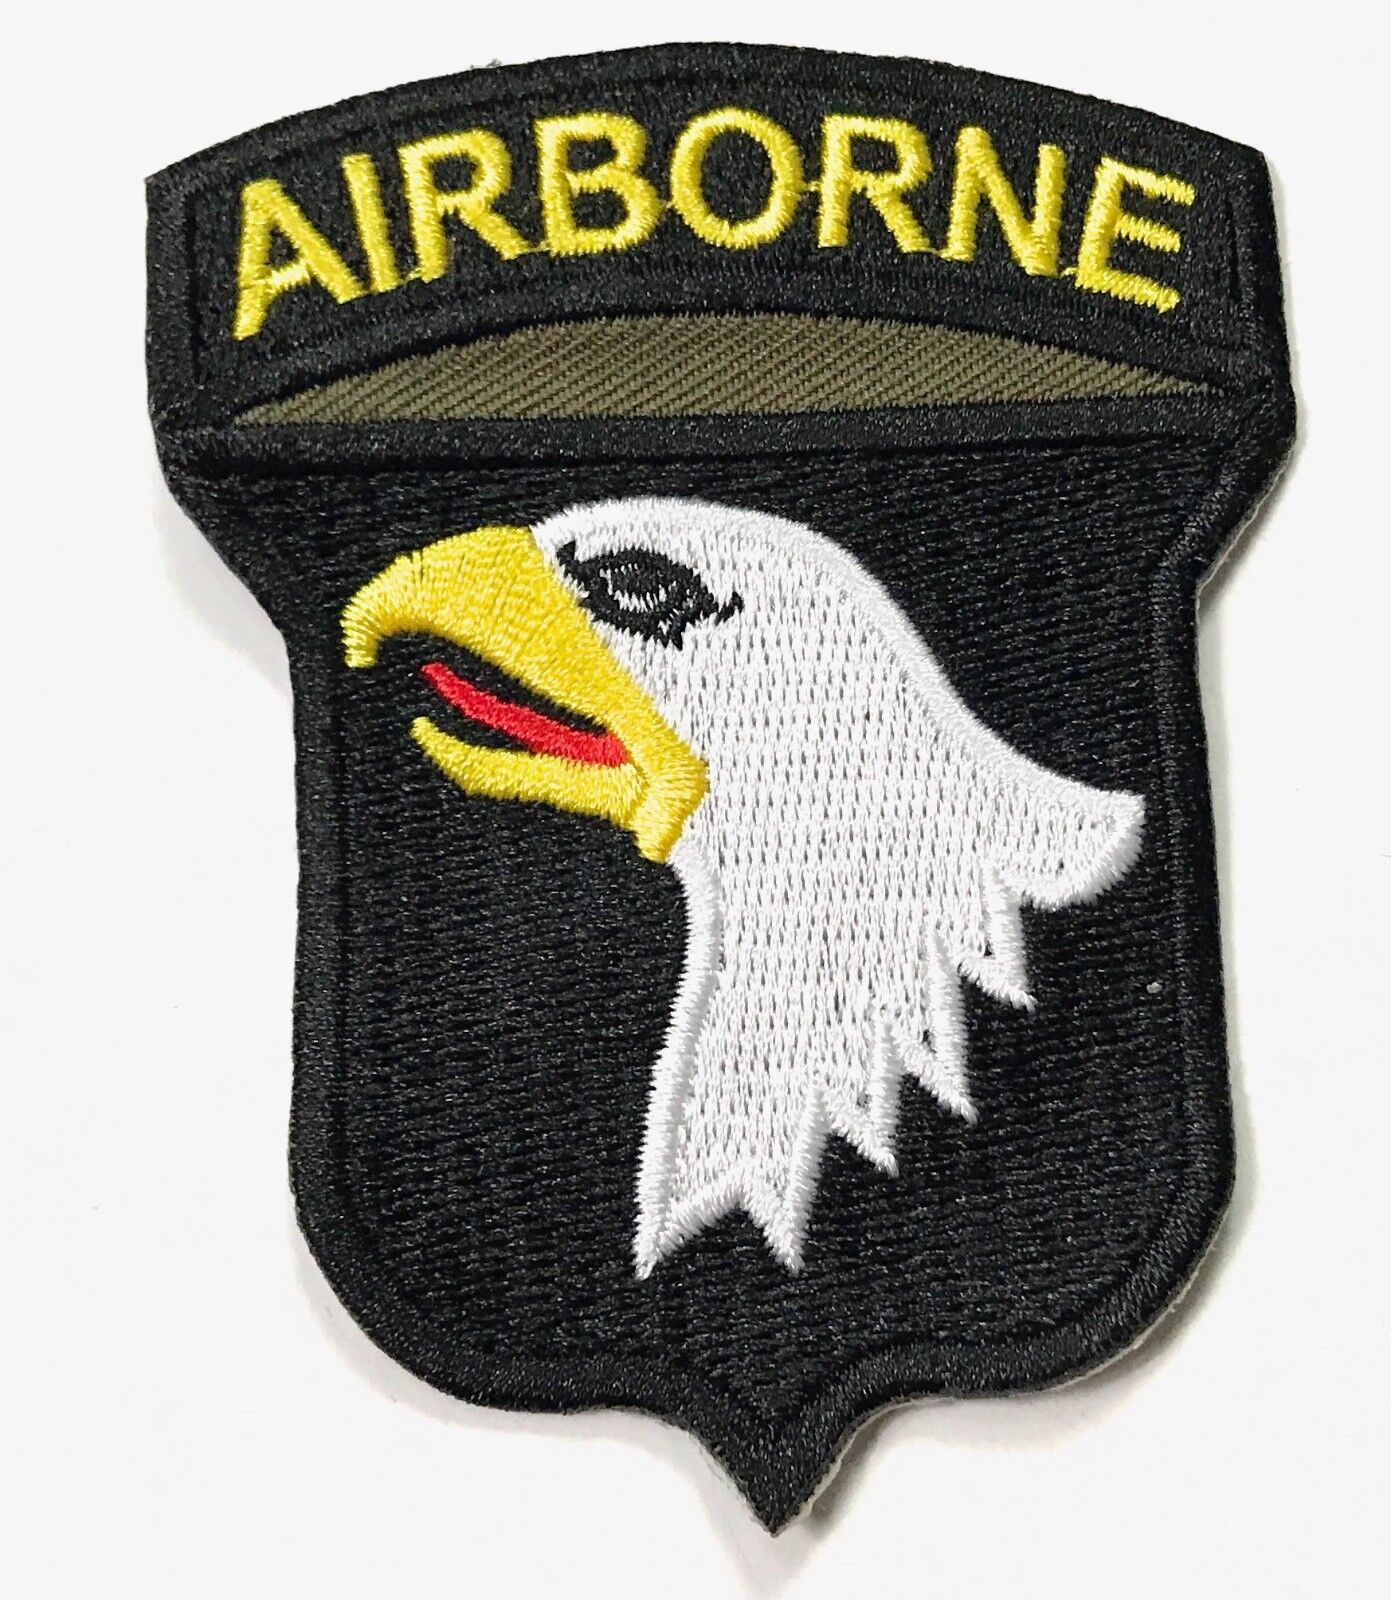  WWII US 101ST AIRBORNE PARATROOPER SLEEVE DIVISION INSIGNIA PATCH